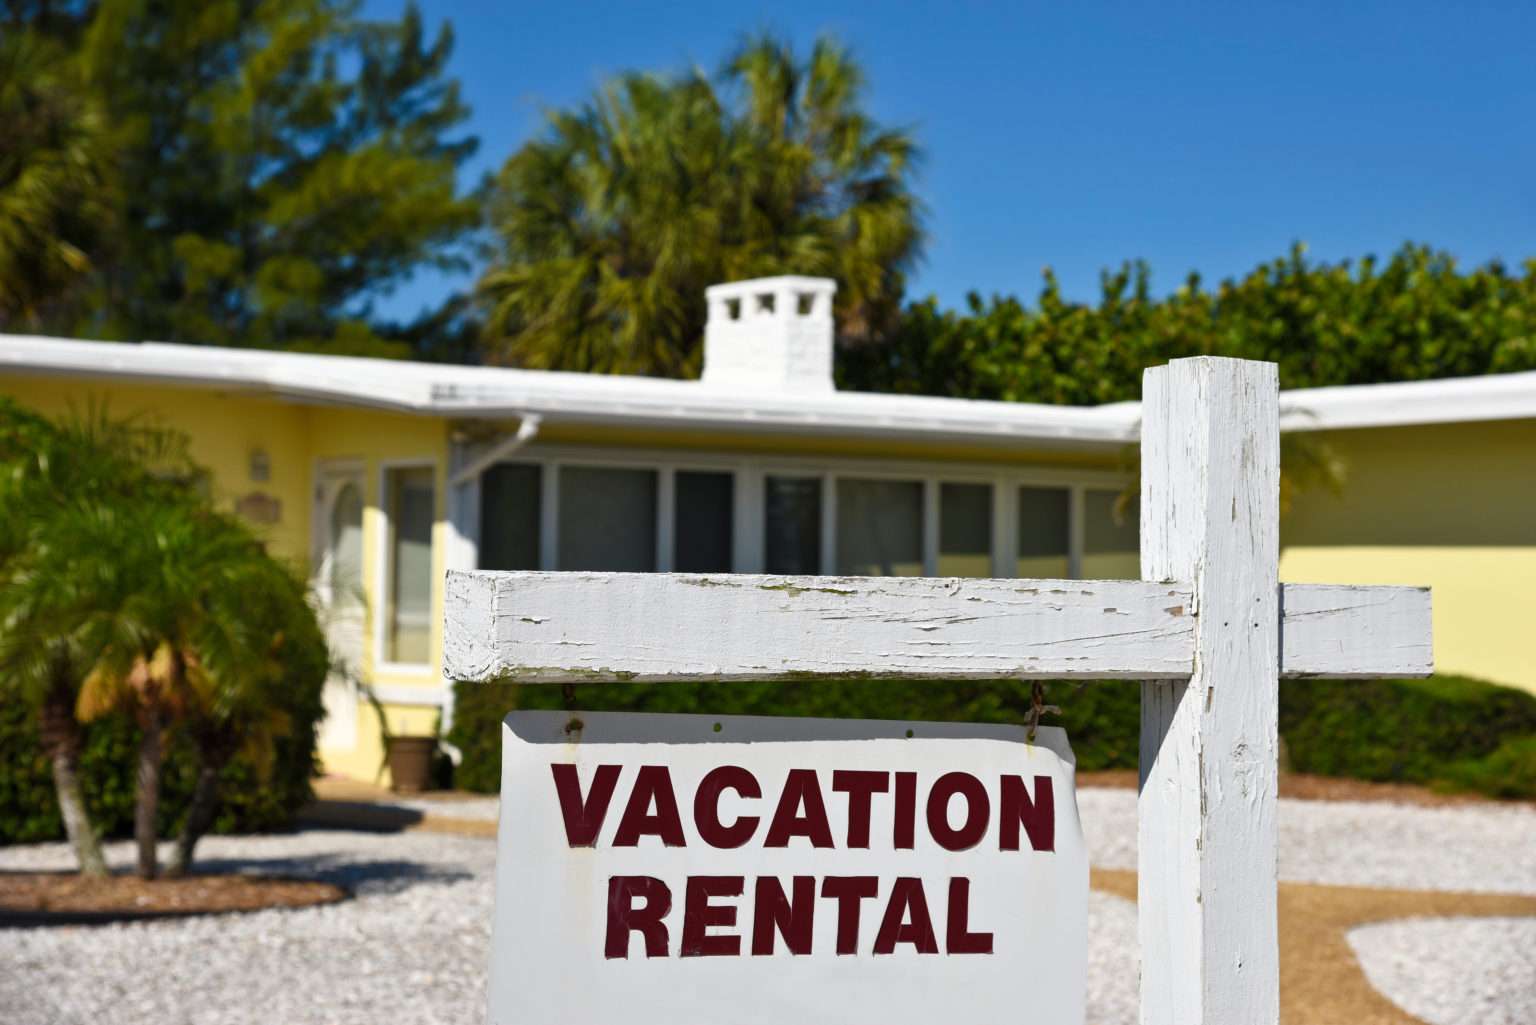 Are Vacation Rentals a Good Investment?